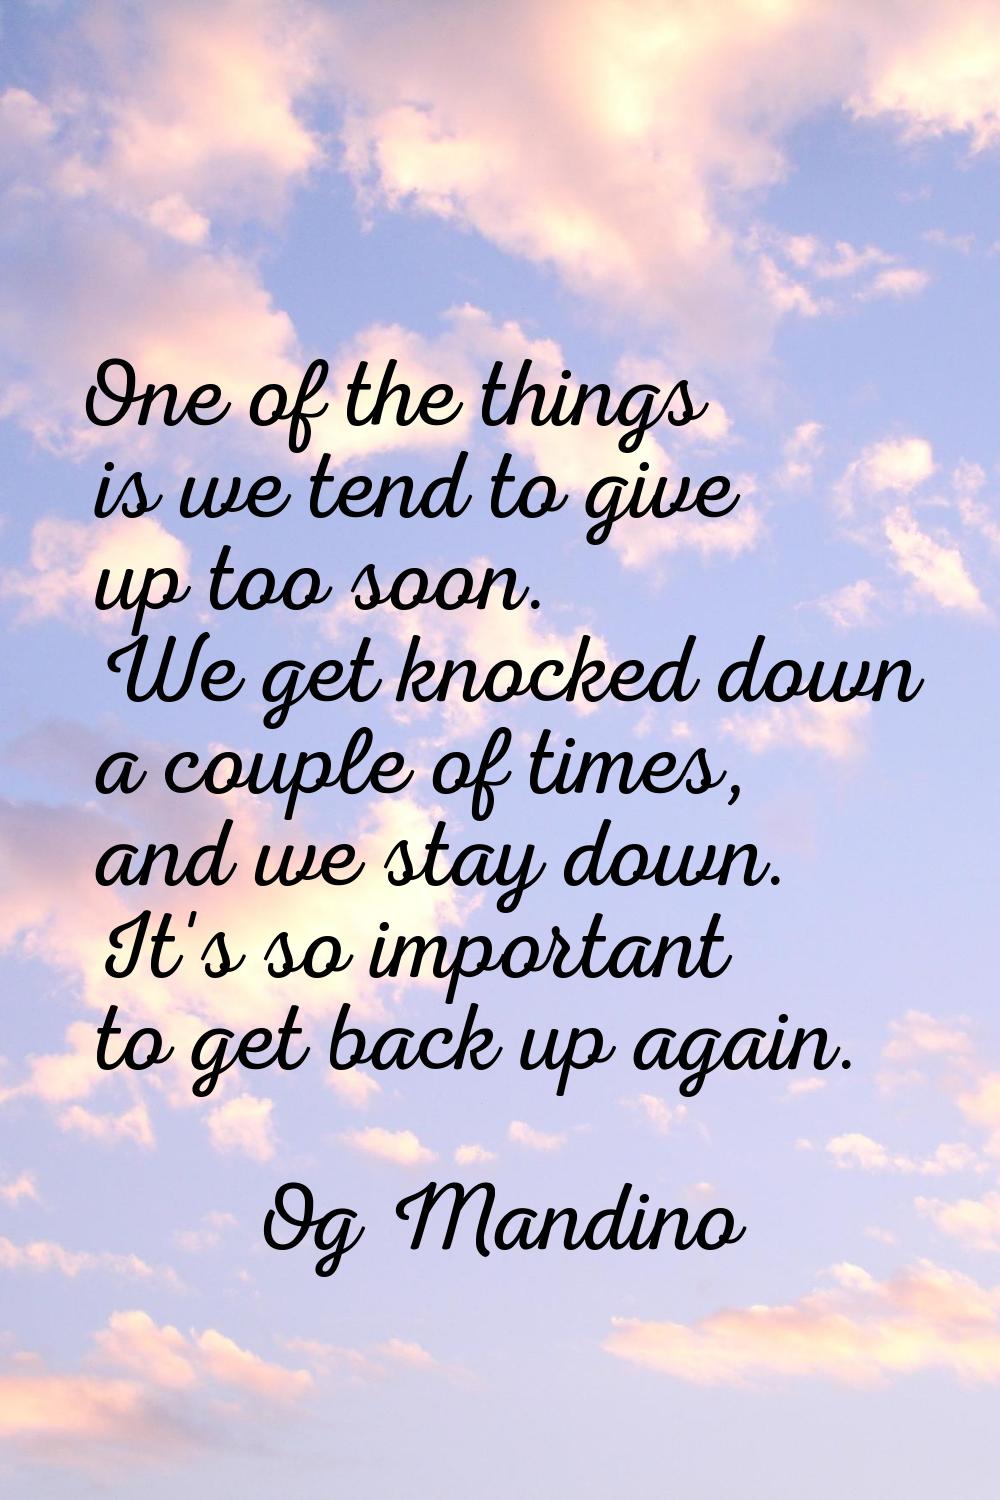 One of the things is we tend to give up too soon. We get knocked down a couple of times, and we sta